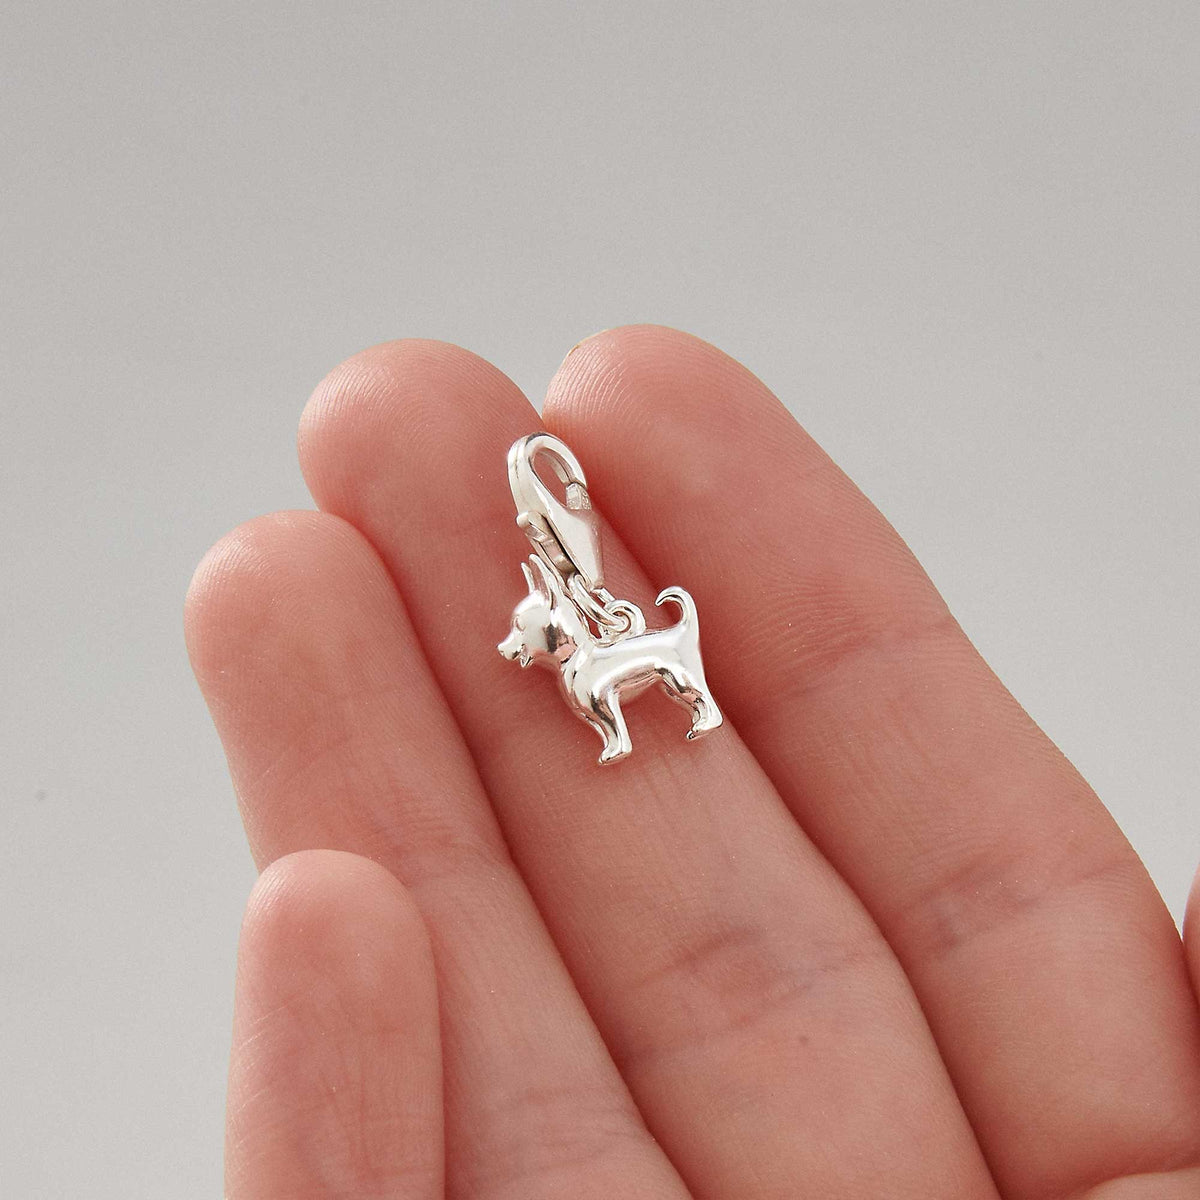 Chihuahua dog breed solid sterling silver dog charm for bracelet Scarlett Jewellery Ltd